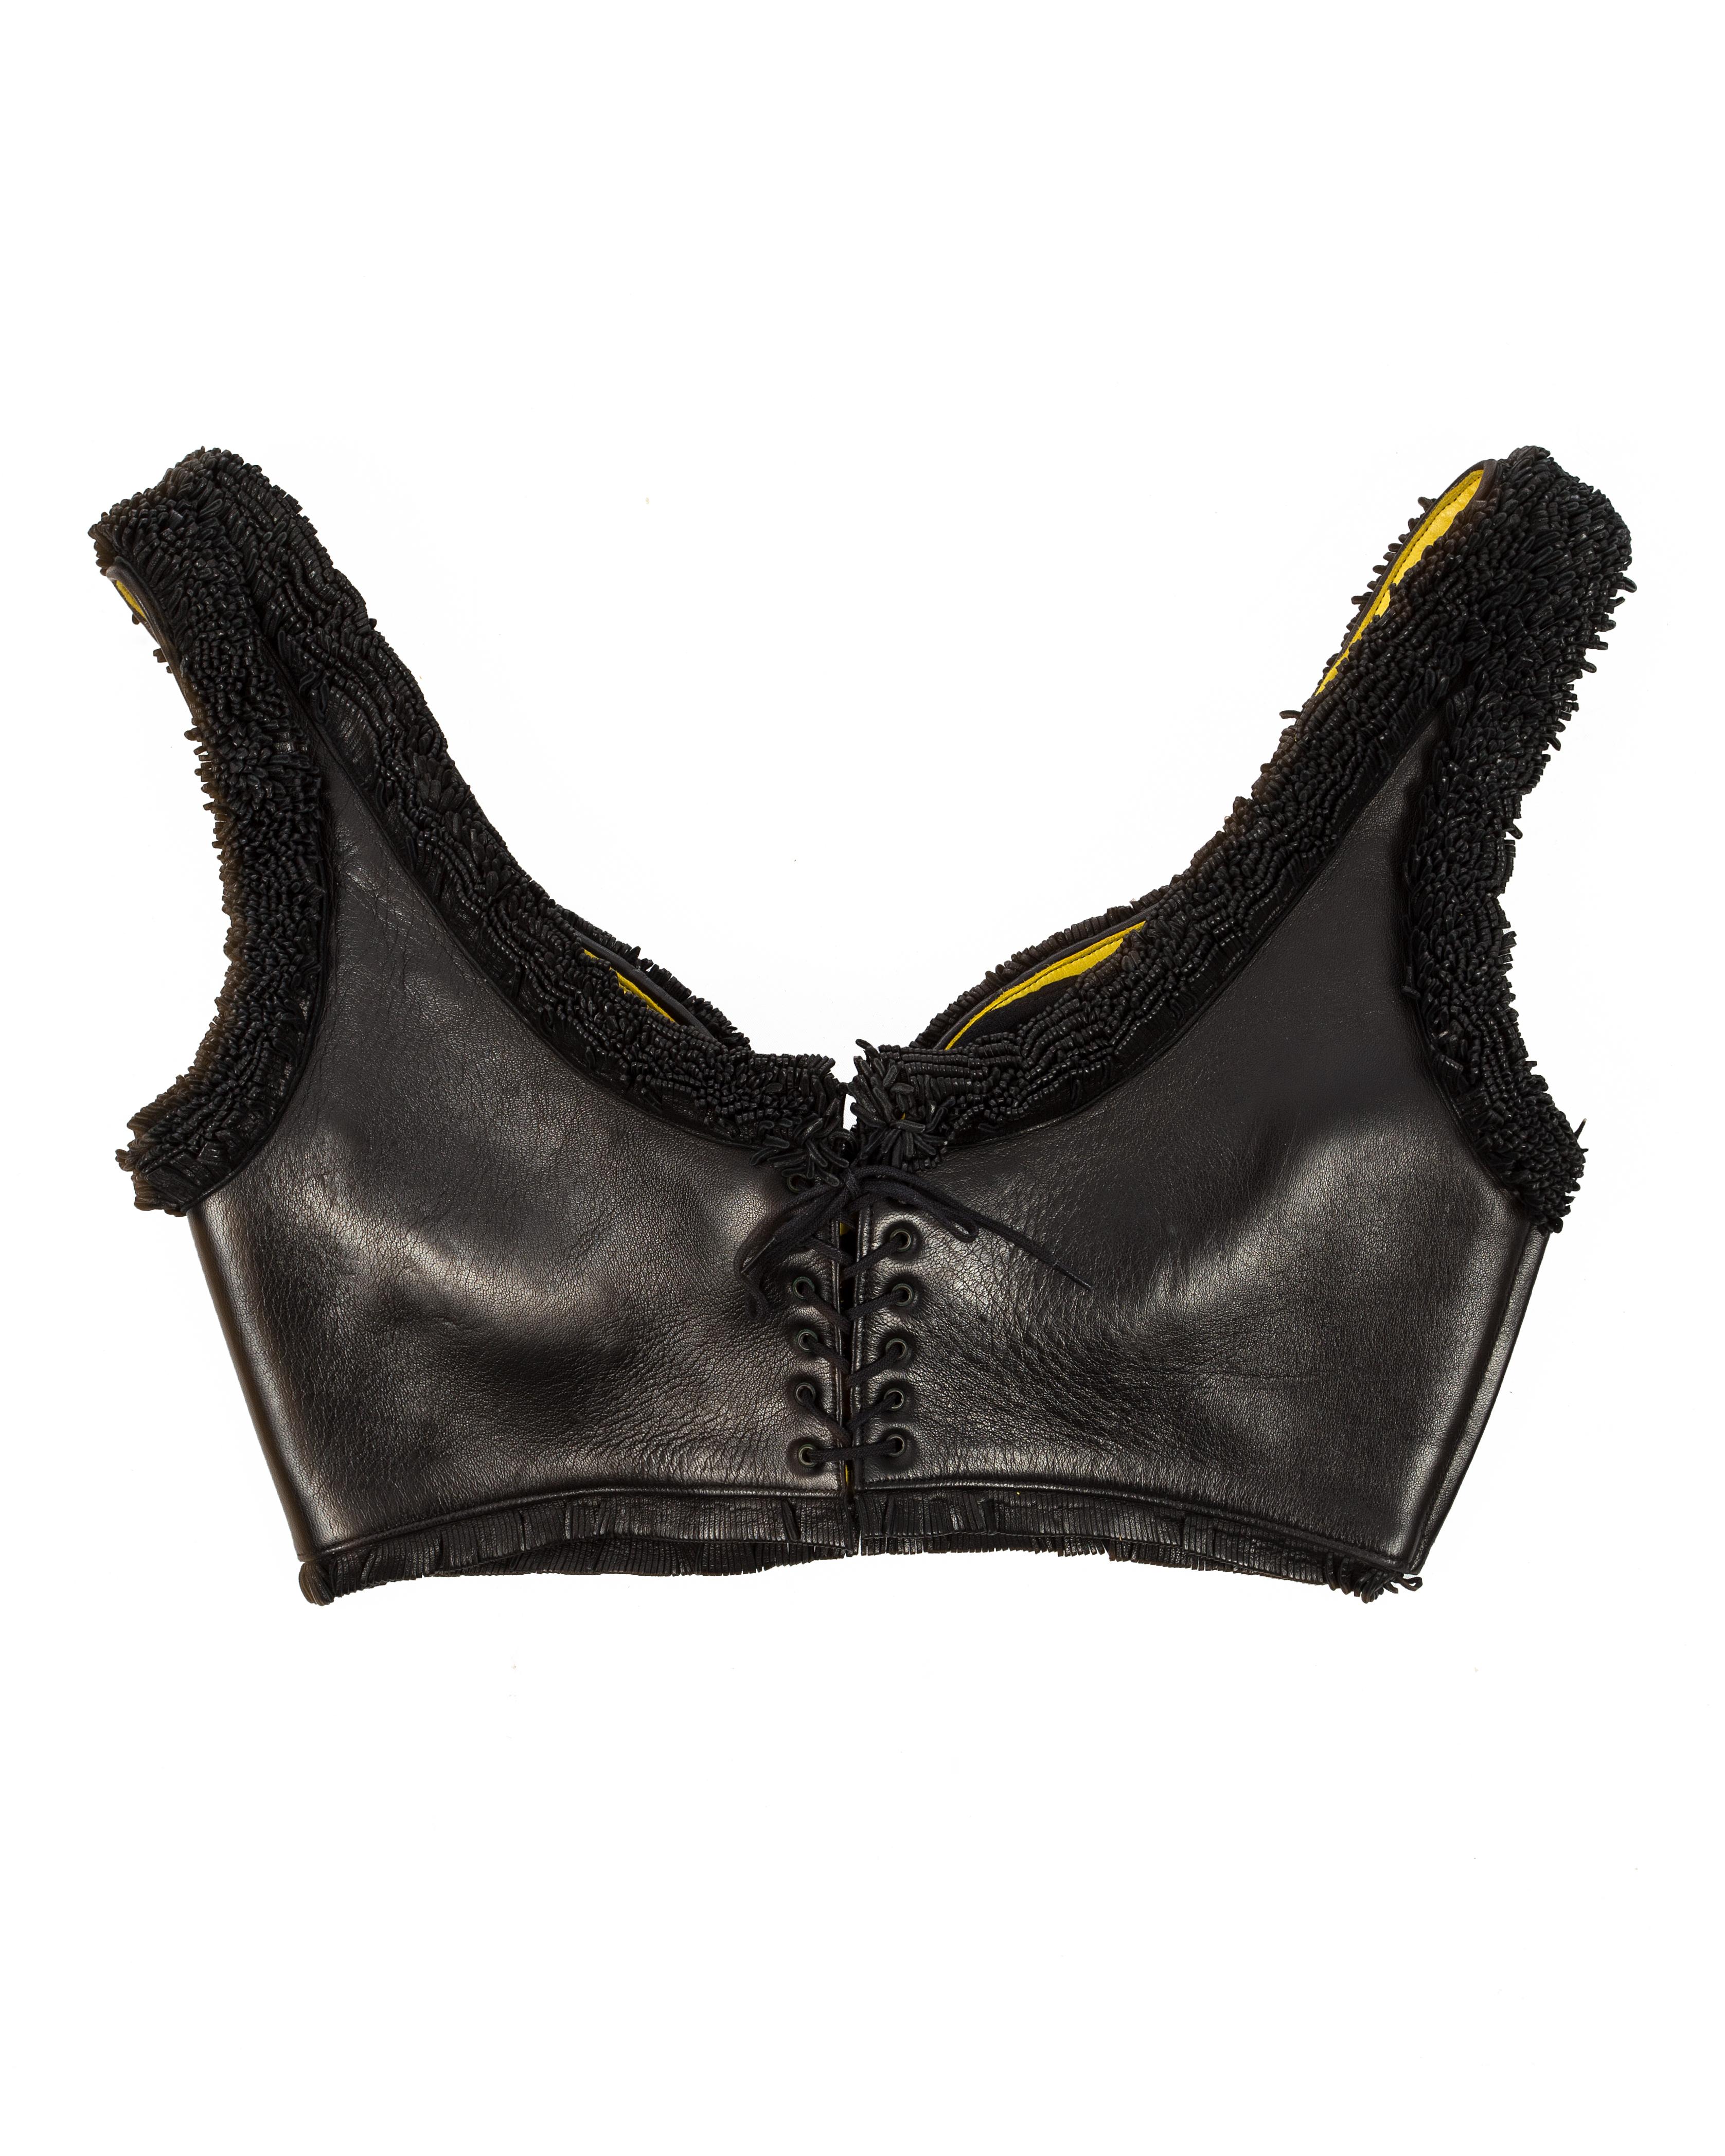 Azzedine Alaia; Black leather fringed bra with yellow leather backing, lace up fastening, built in padded bra and side zip closure

ca. 1994